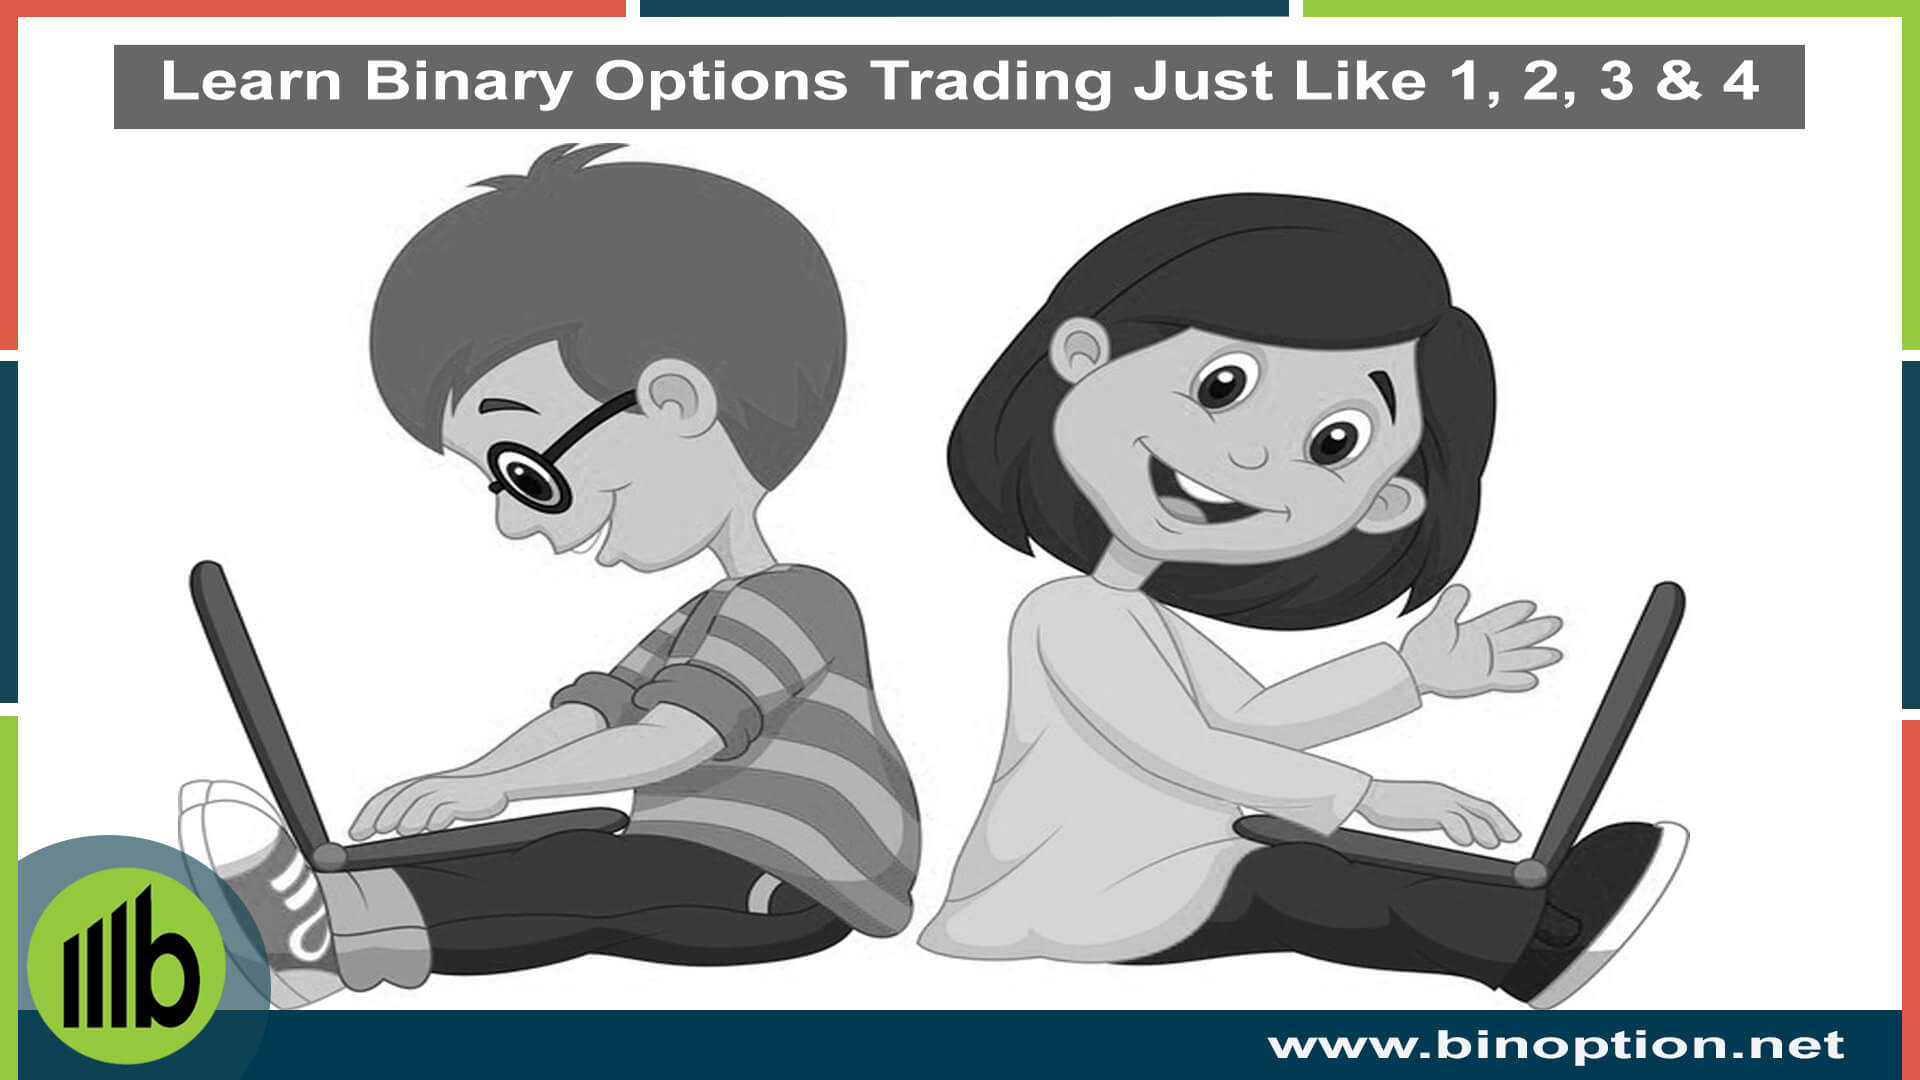 I want to learn binary options